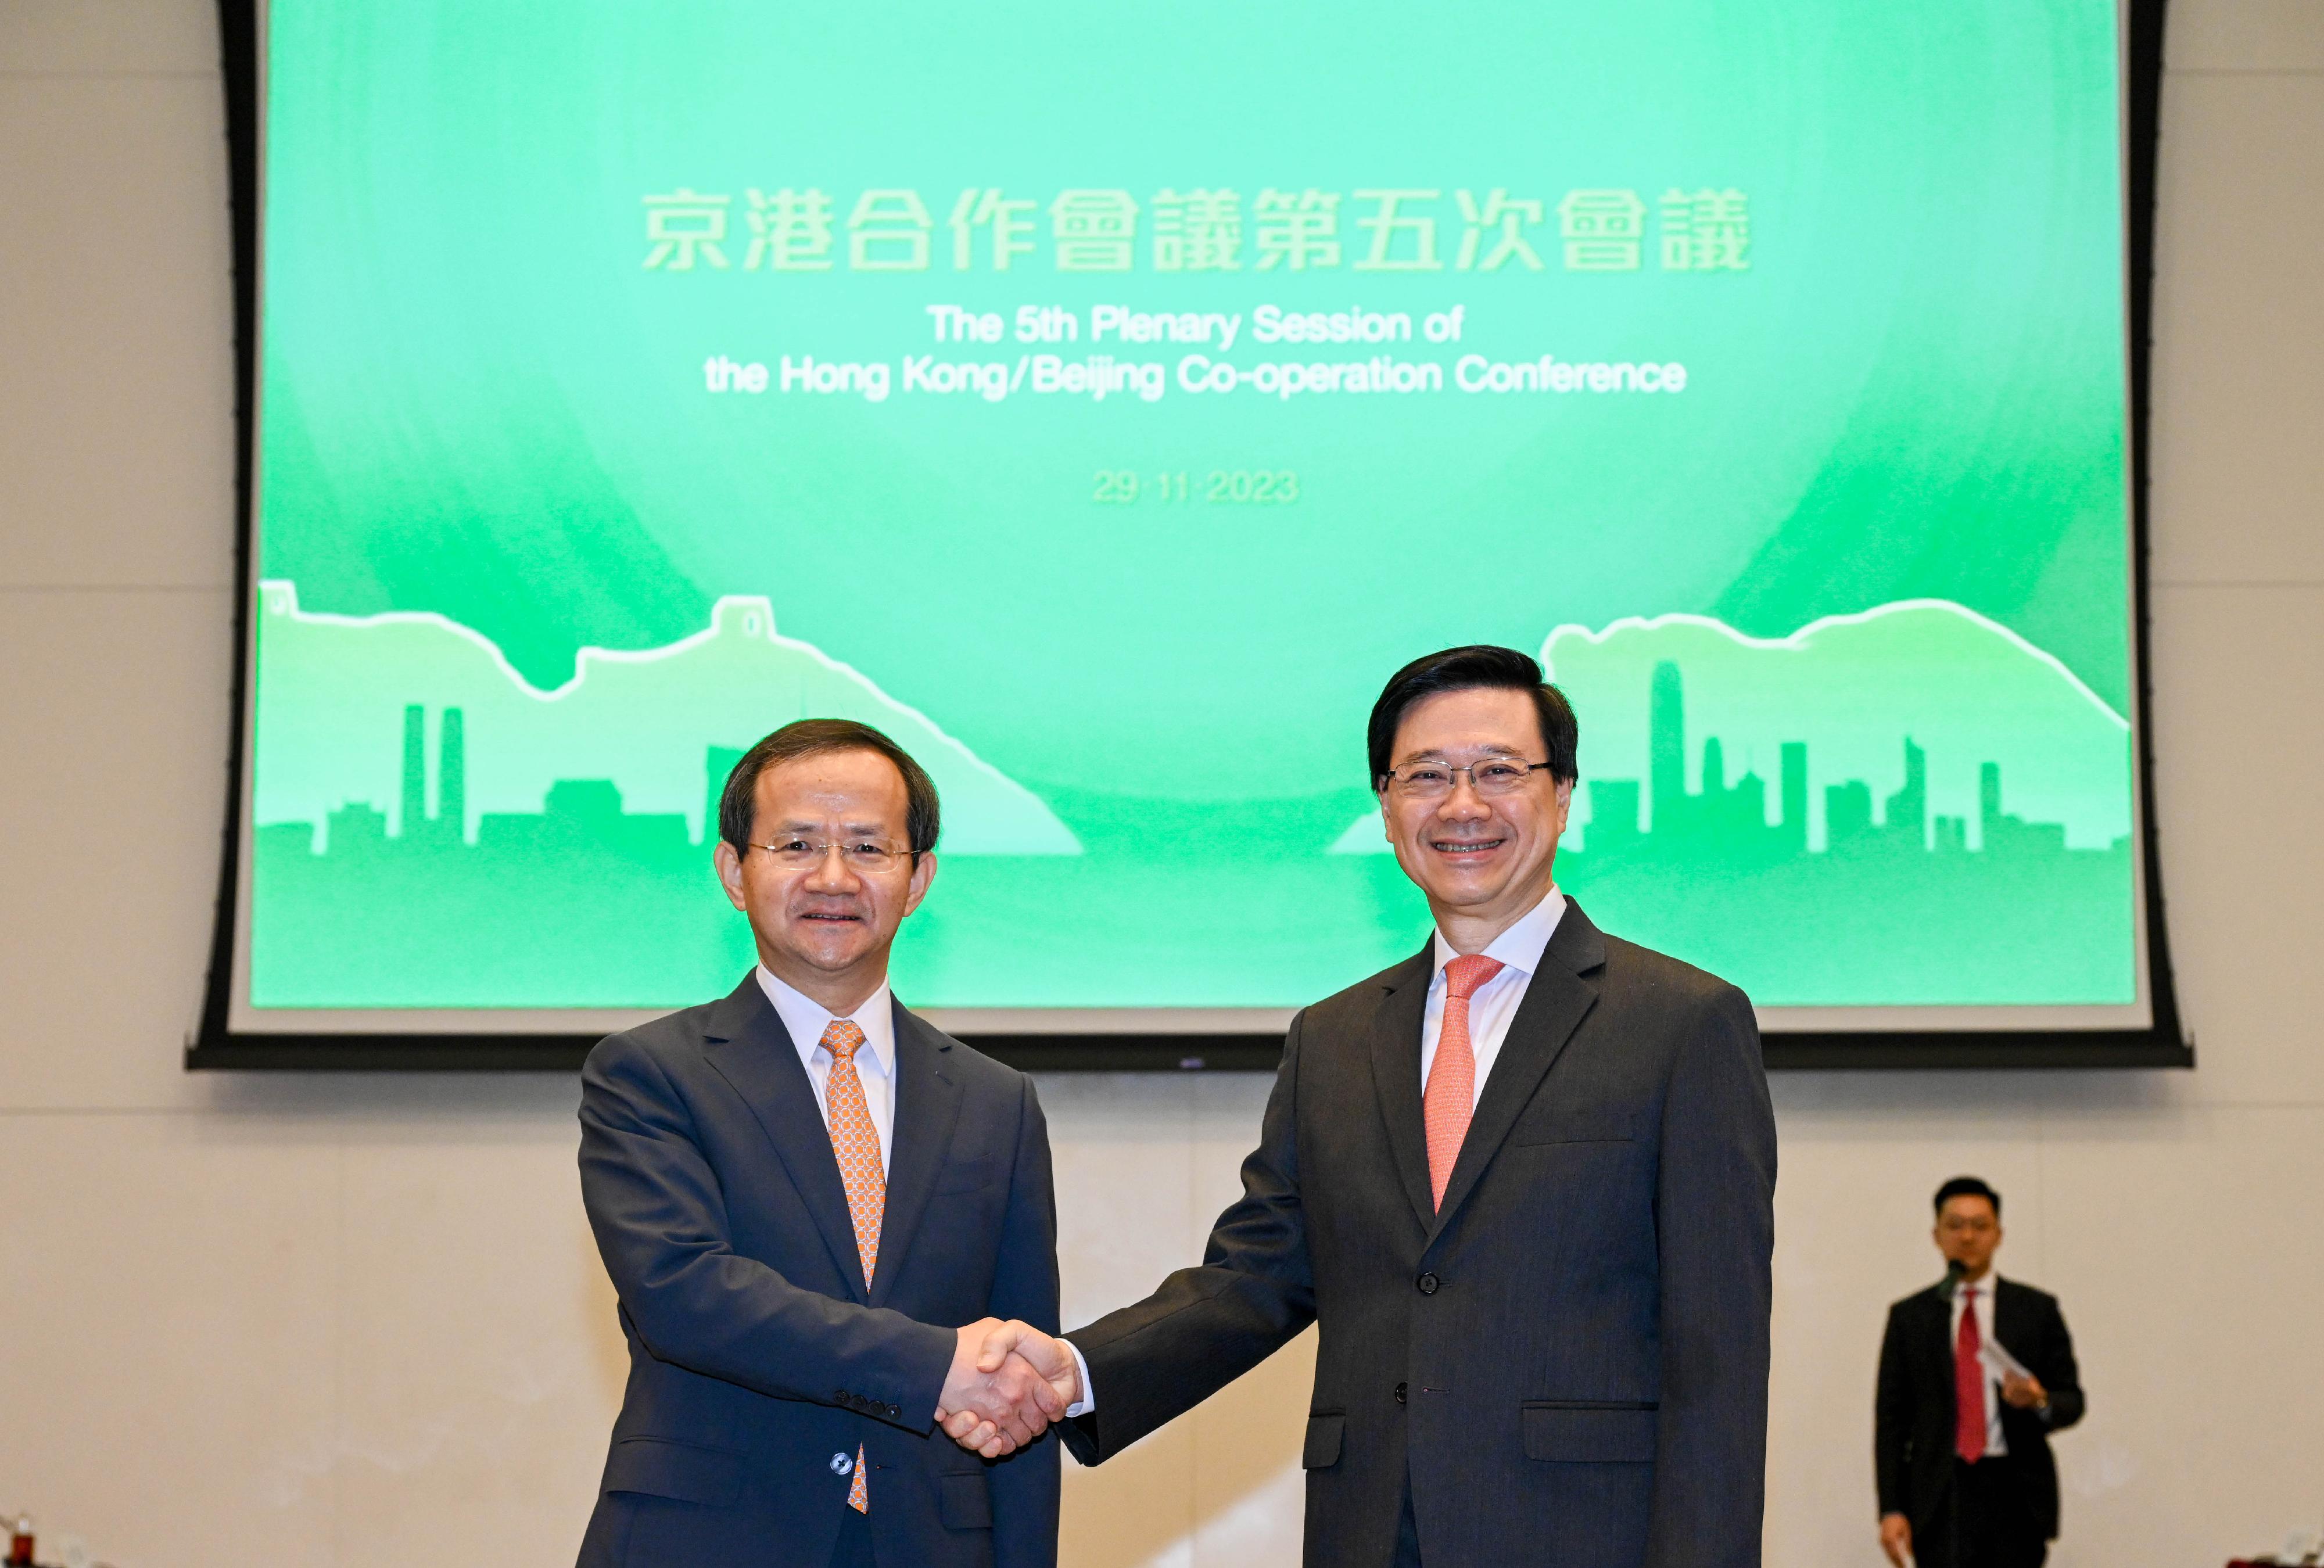 The Chief Executive, Mr John Lee (right), and the Mayor of Beijing, Mr Yin Yong (left), leading the delegations of the governments of Hong Kong Special Administrative Region and Beijing respectively, held the Fifth Plenary Session of the Hong Kong/Beijing Co-operation Conference in Hong Kong today (November 29).